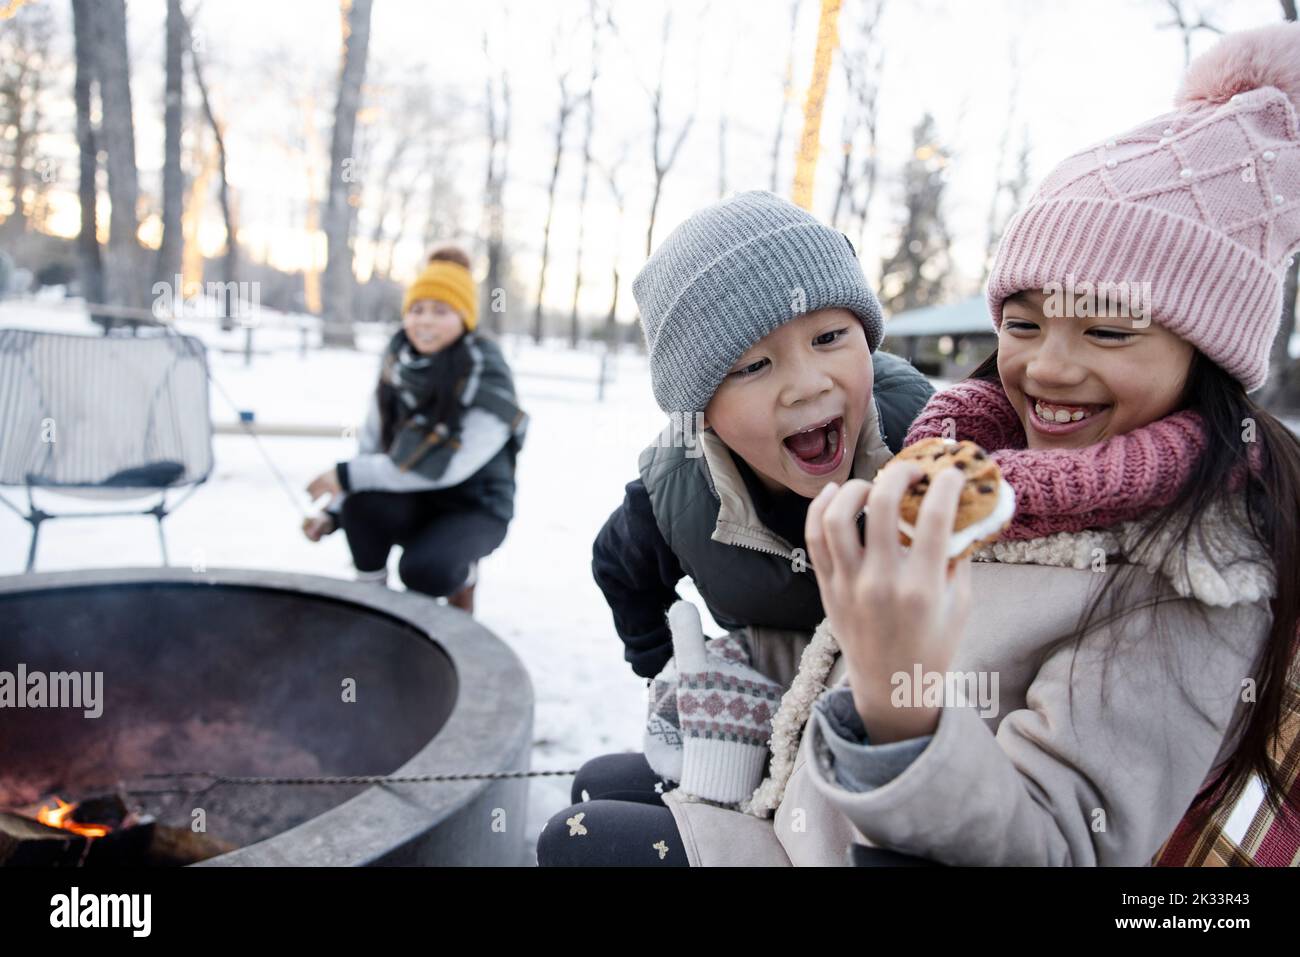 Happy brother and sister enjoying smores at fire pit in winter park Stock Photo